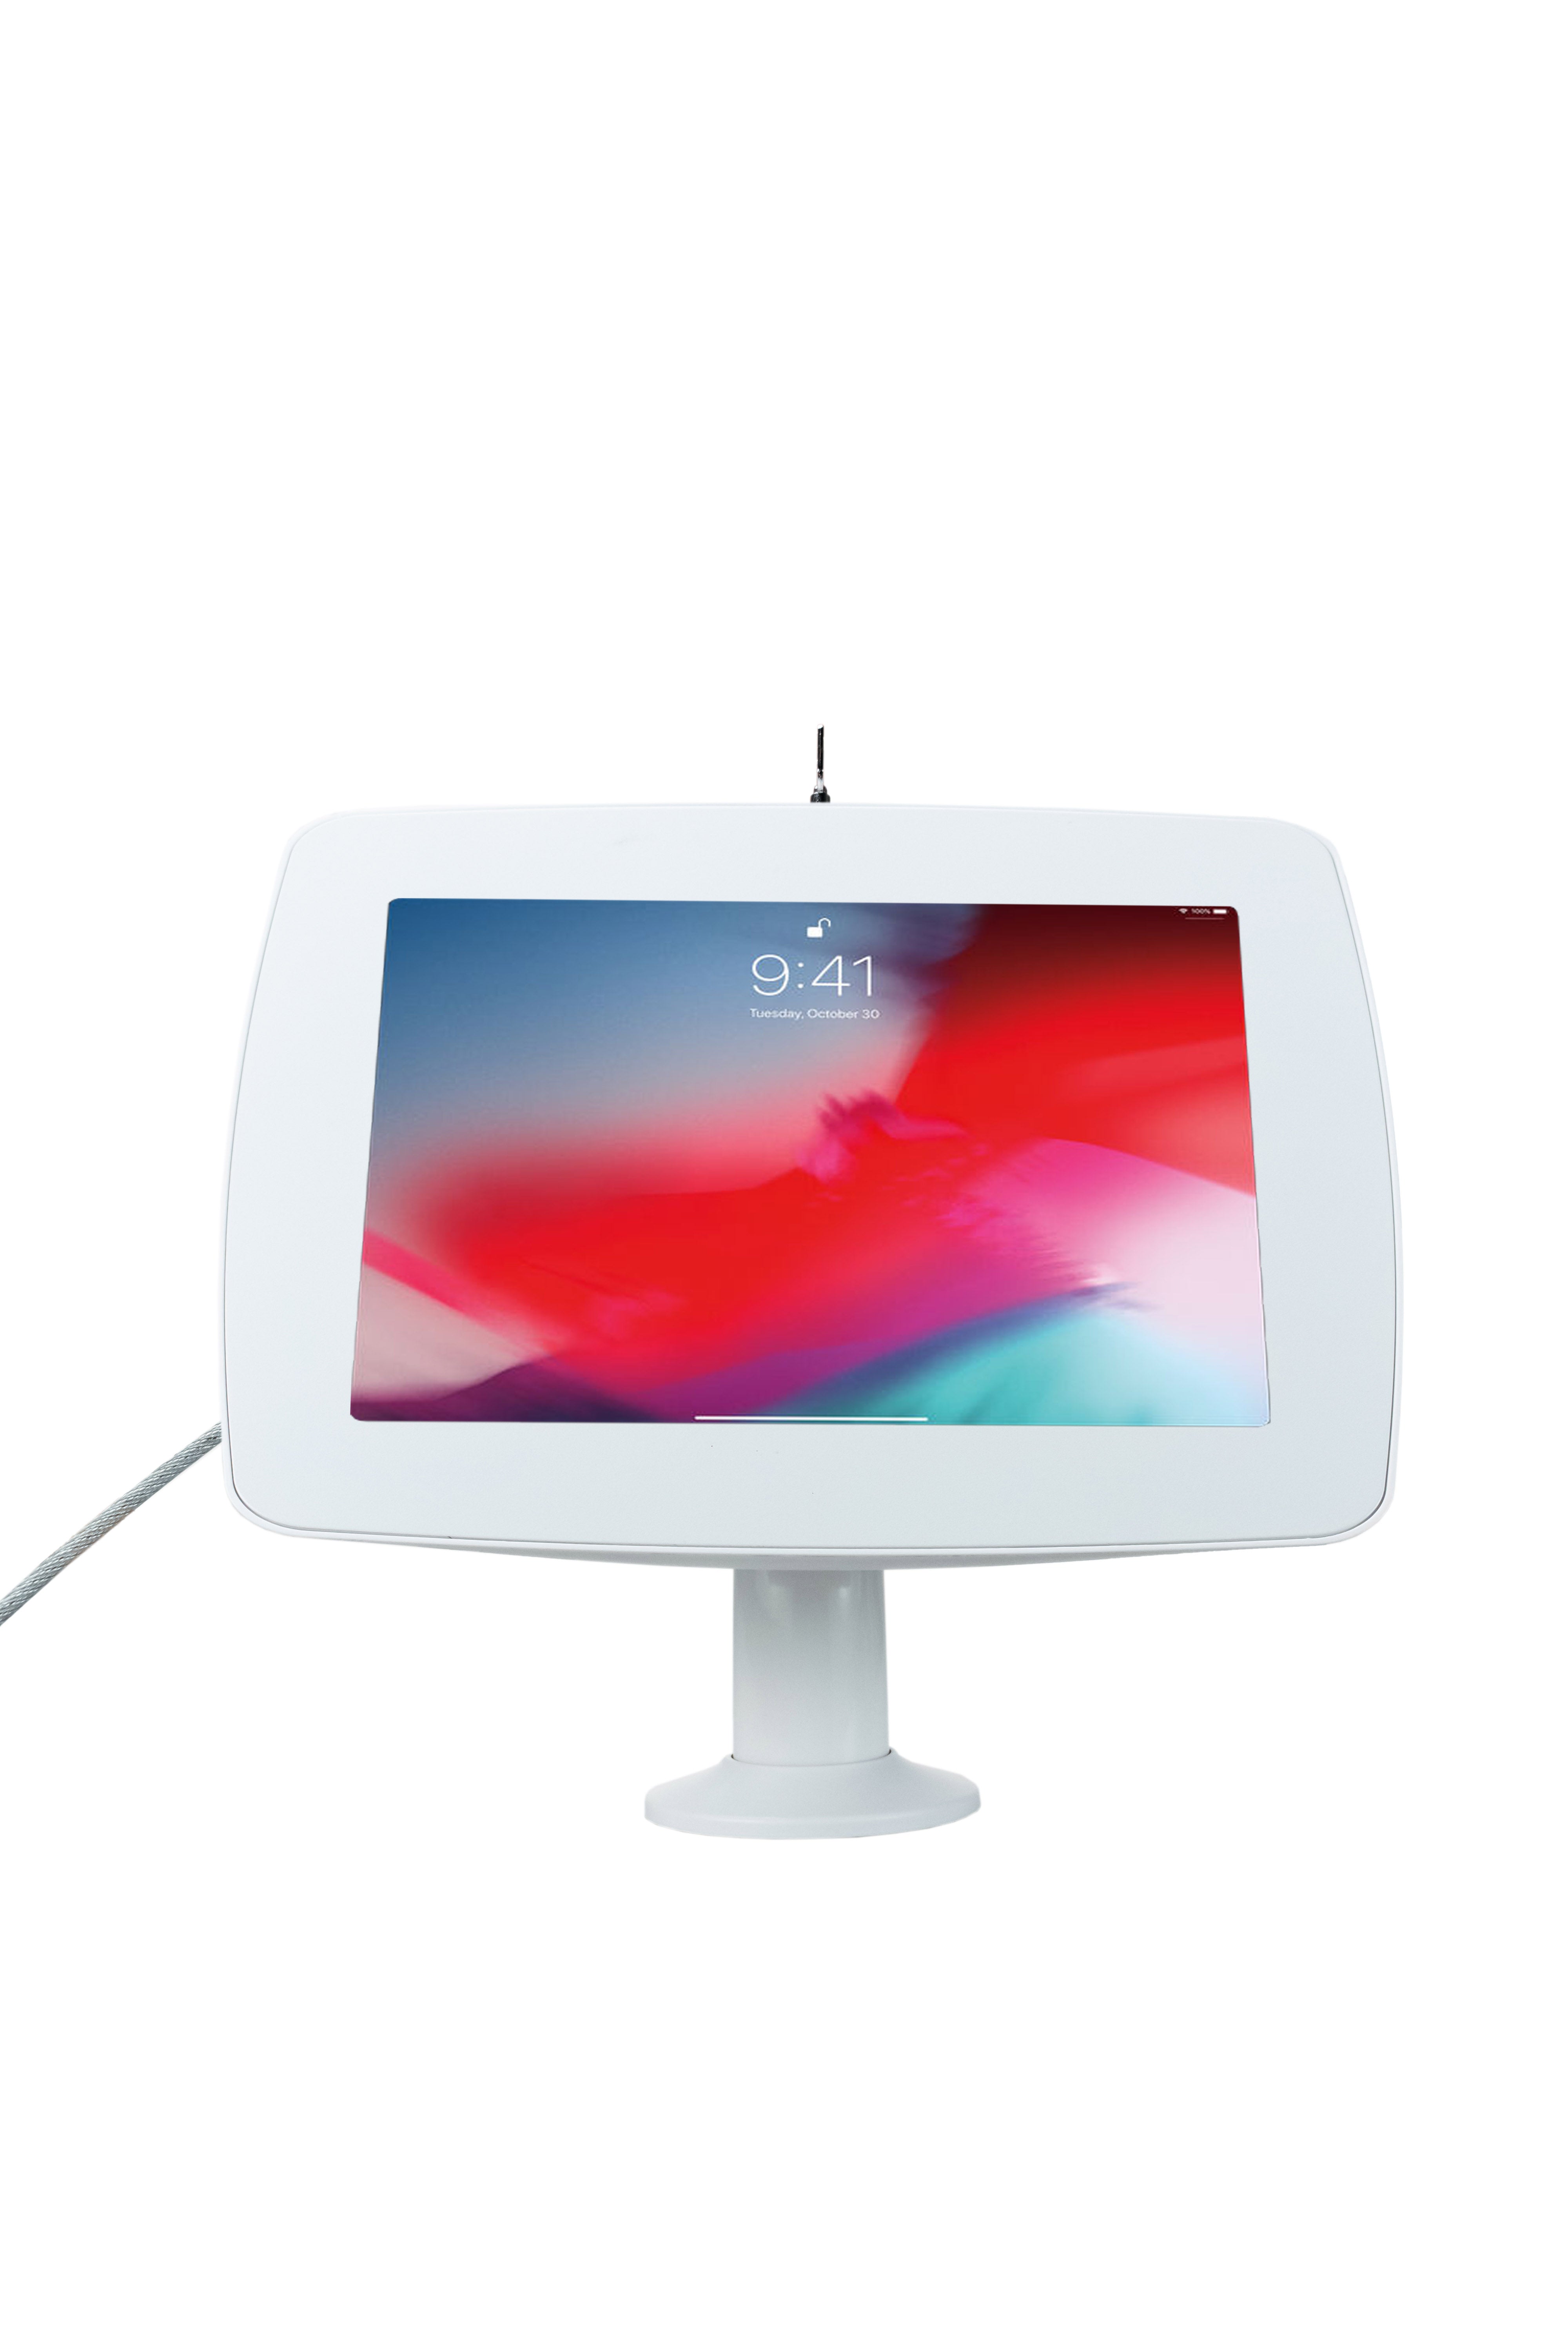 Security Countertop Kiosk for iPad Pro 9.7 and iPad Air 2